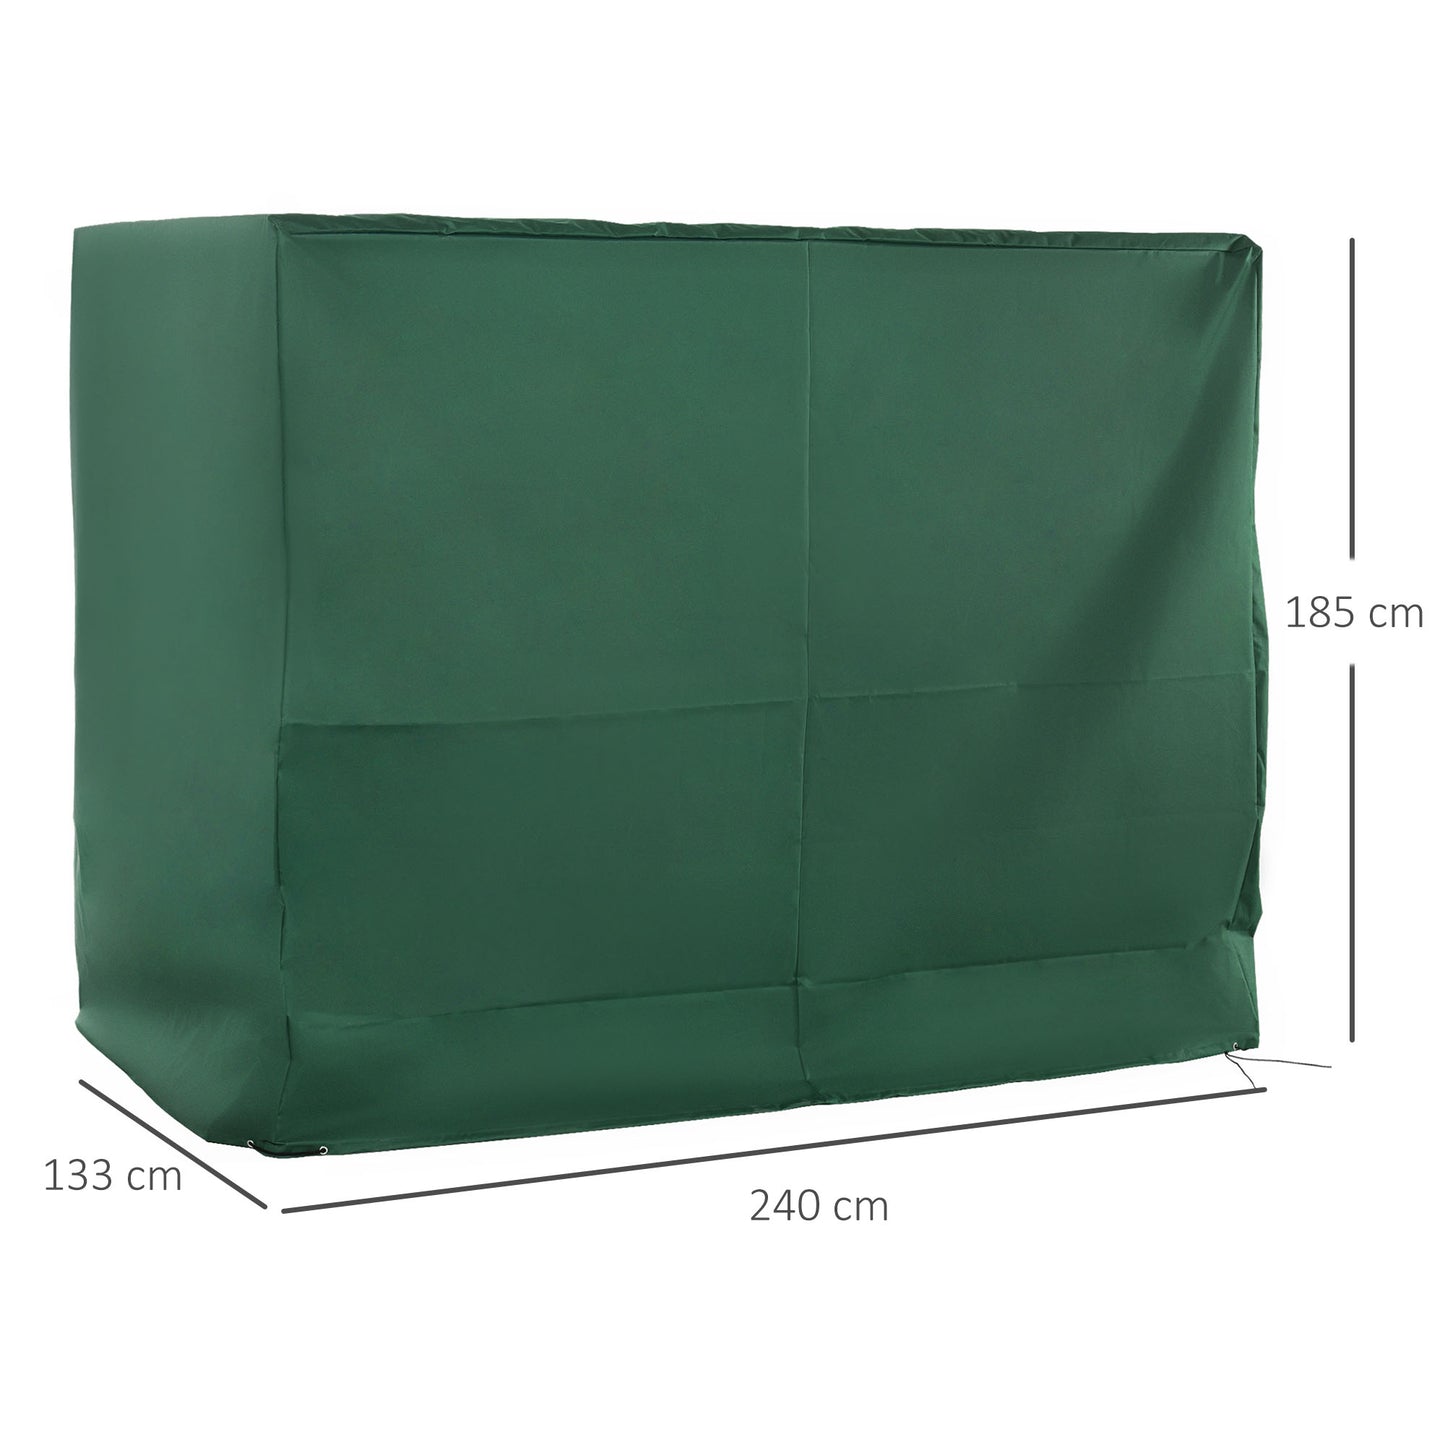 Outsunny Oxford Patio 3-seater Swing Chair Cover Outdoor Garden Furniture Rain Protection Protector Waterproof Anti-UV Green 240L x 133W x 185H cm